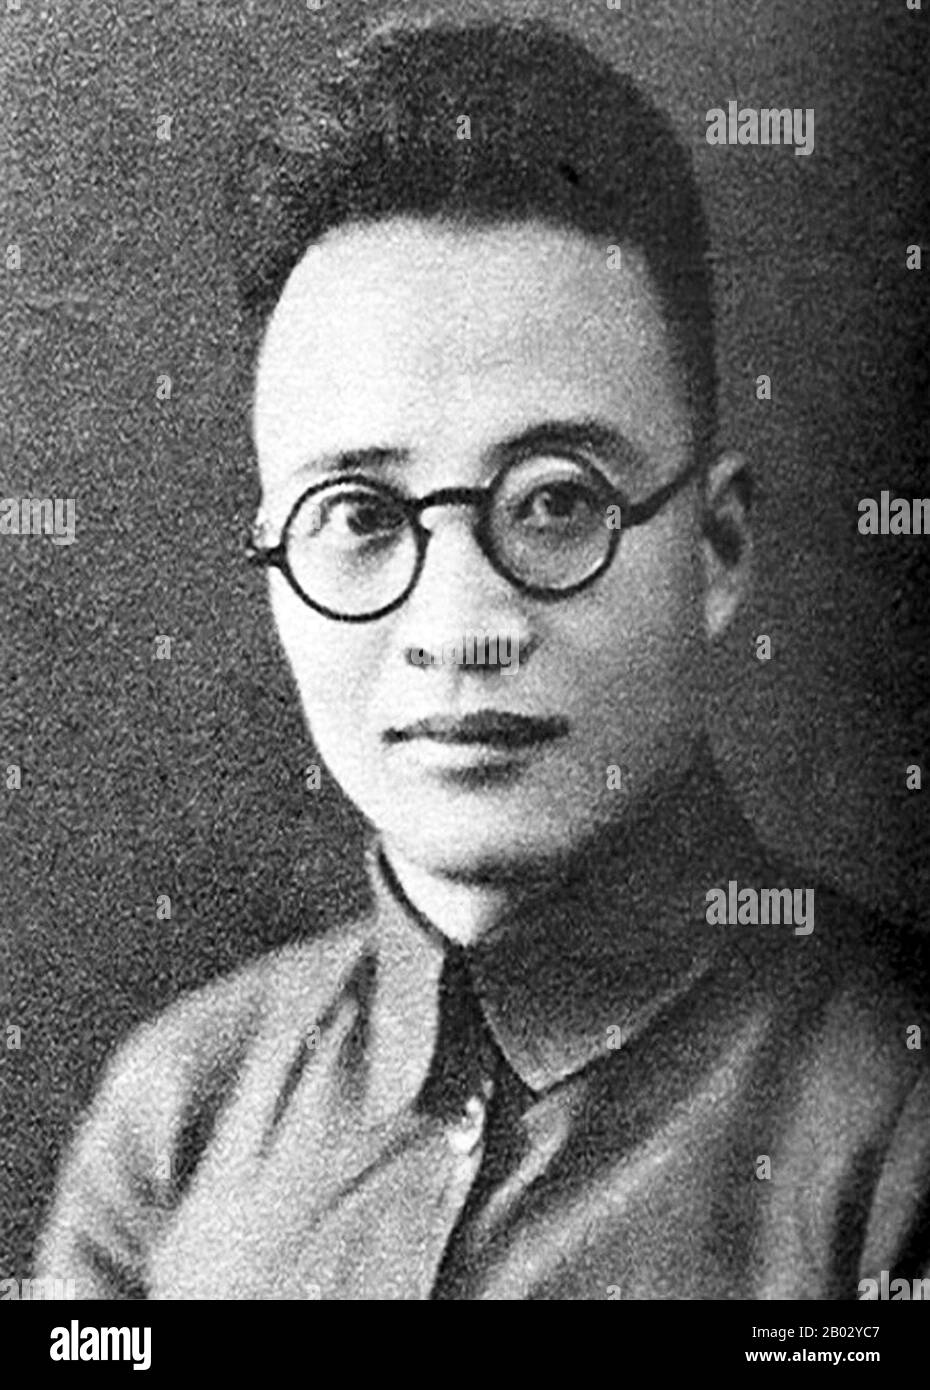 Qin Bangxian was born in Wuxi, Jiangsu, in 1907. In his earlier years, Qin studied at the Suzhou Industrial School where he took an active role in activities against imperialism and the warlords tyrannizing China. In 1925 Qin entered Shanghai University, a university that was known for its impact on young revolutionaries s at the time. The ideas of Marxism and Leninism were taught there by early leaders of the Chinese Communist party.  After the end of World War II in 1945, Mao Zedong was invited by Chiang Kaishek to Chongqing for peace negotiation in order to avoid civil war between CPC and K Stock Photo